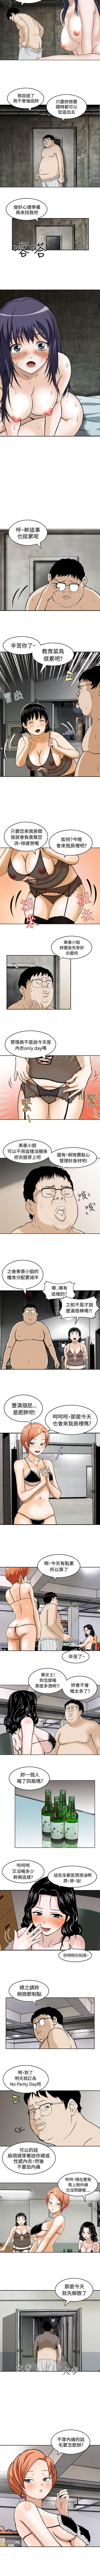 Relax 豬圈 1-27 Solo Female - Page 4